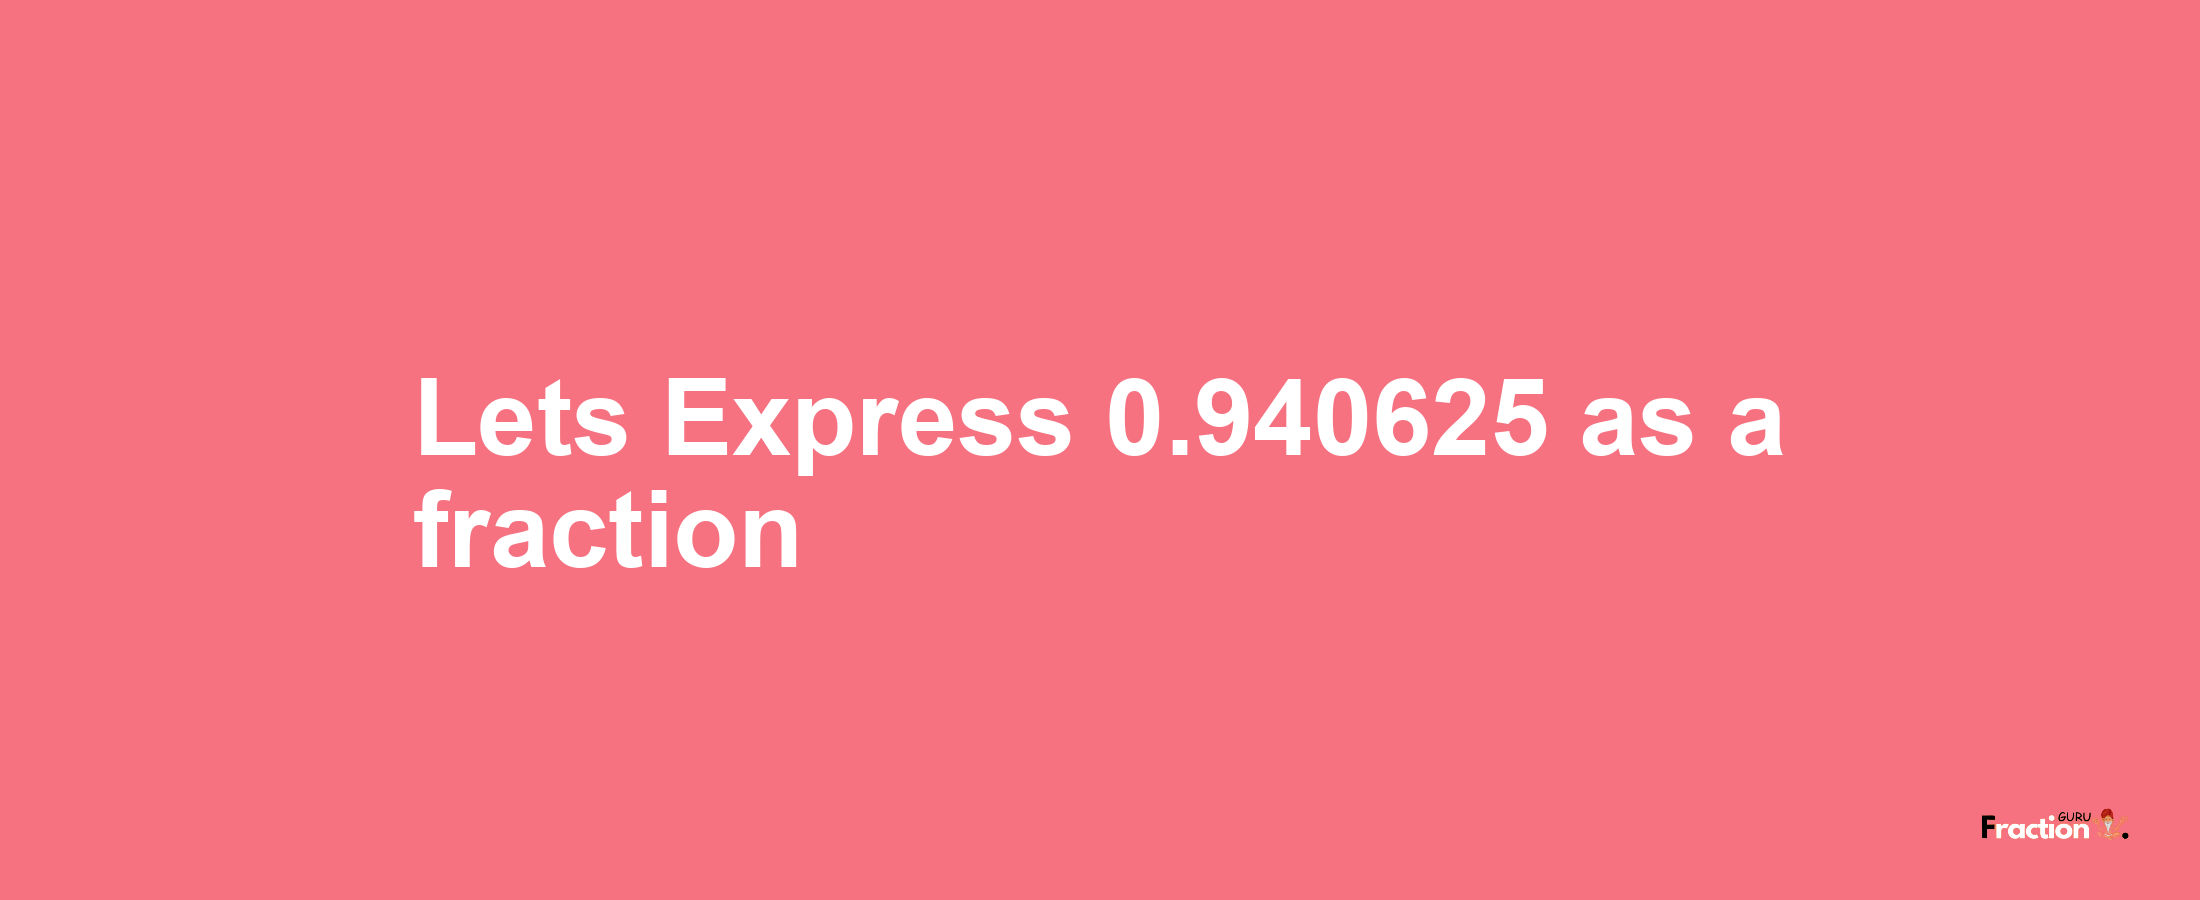 Lets Express 0.940625 as afraction